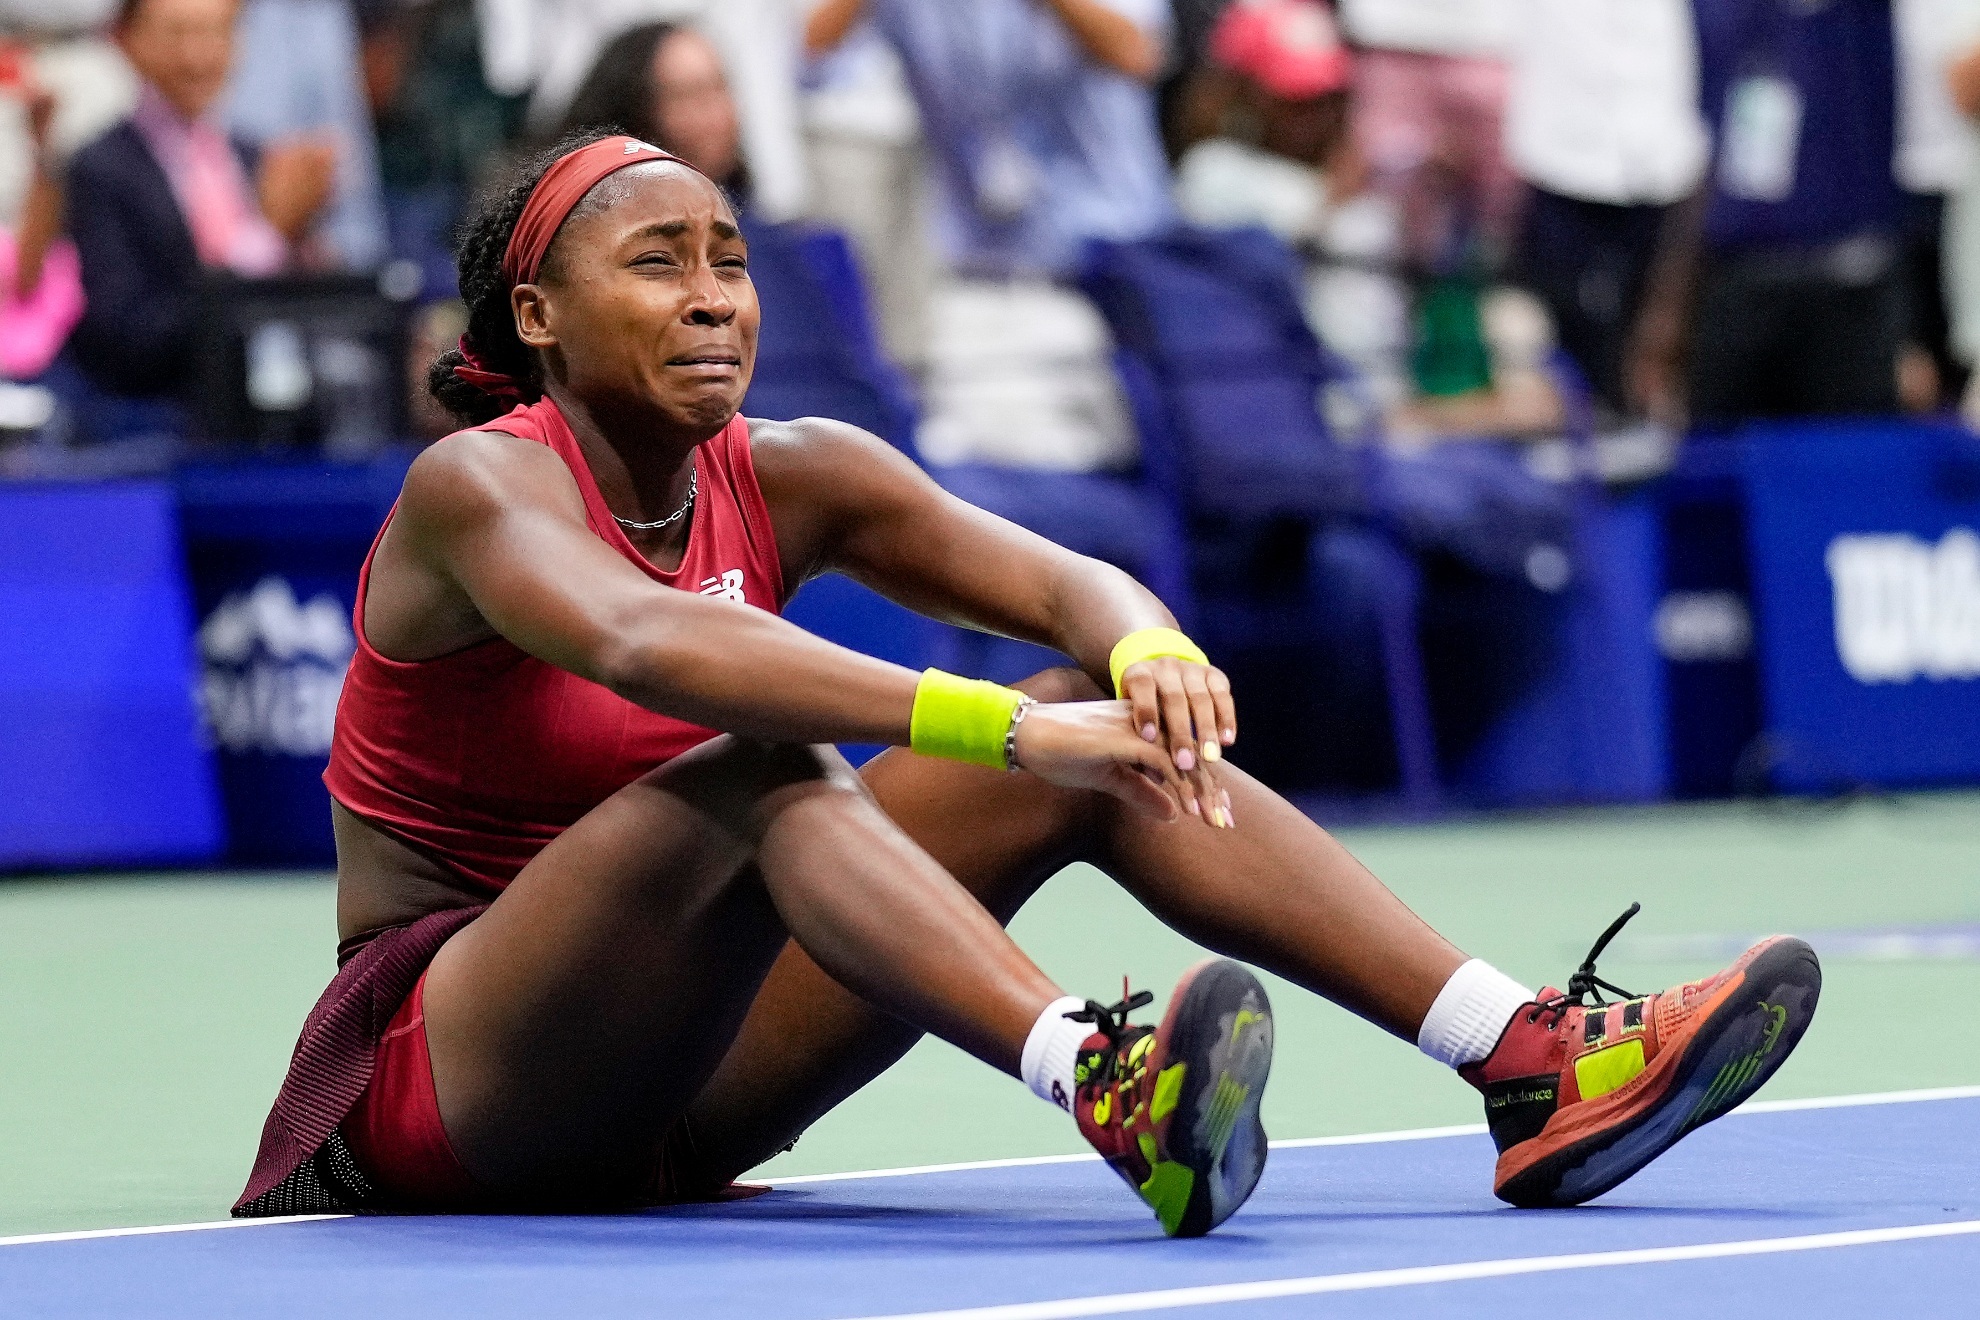 Coco Gauff right after winning her first Grand Slam at 19 years old.